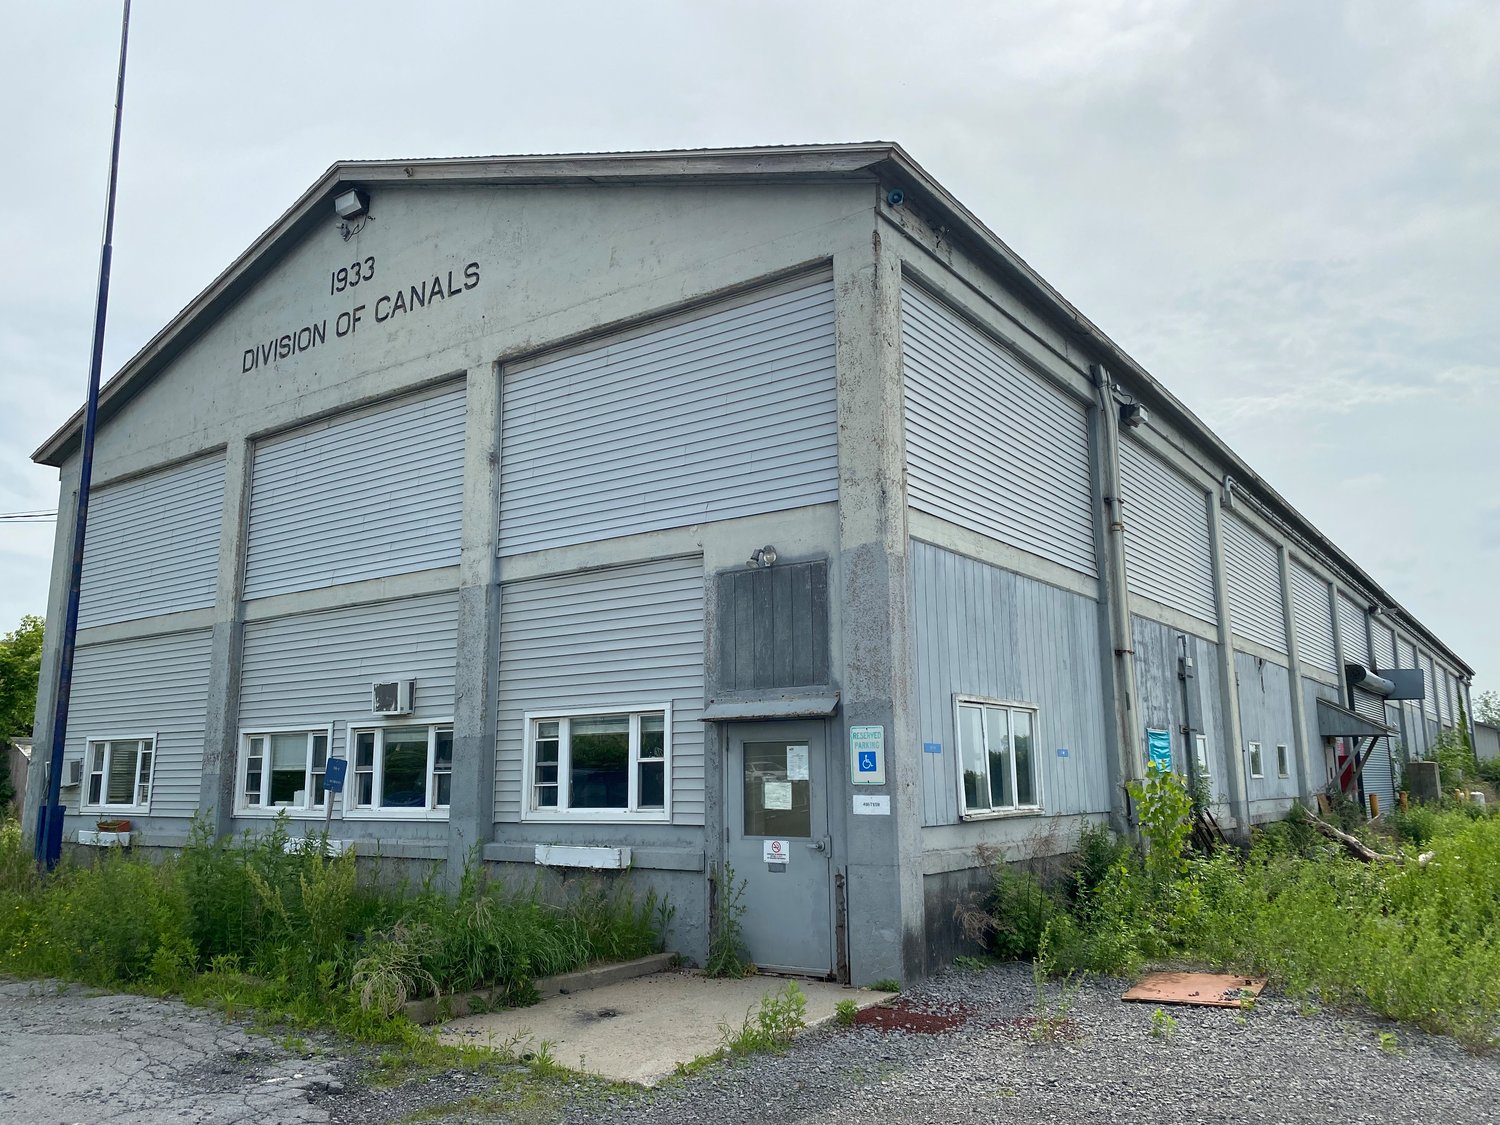 With a vision for the future, the historic 1933 Building in Utica’s Harbor Point, is expected to be renovated into a multipurpose building to support future development of the area.